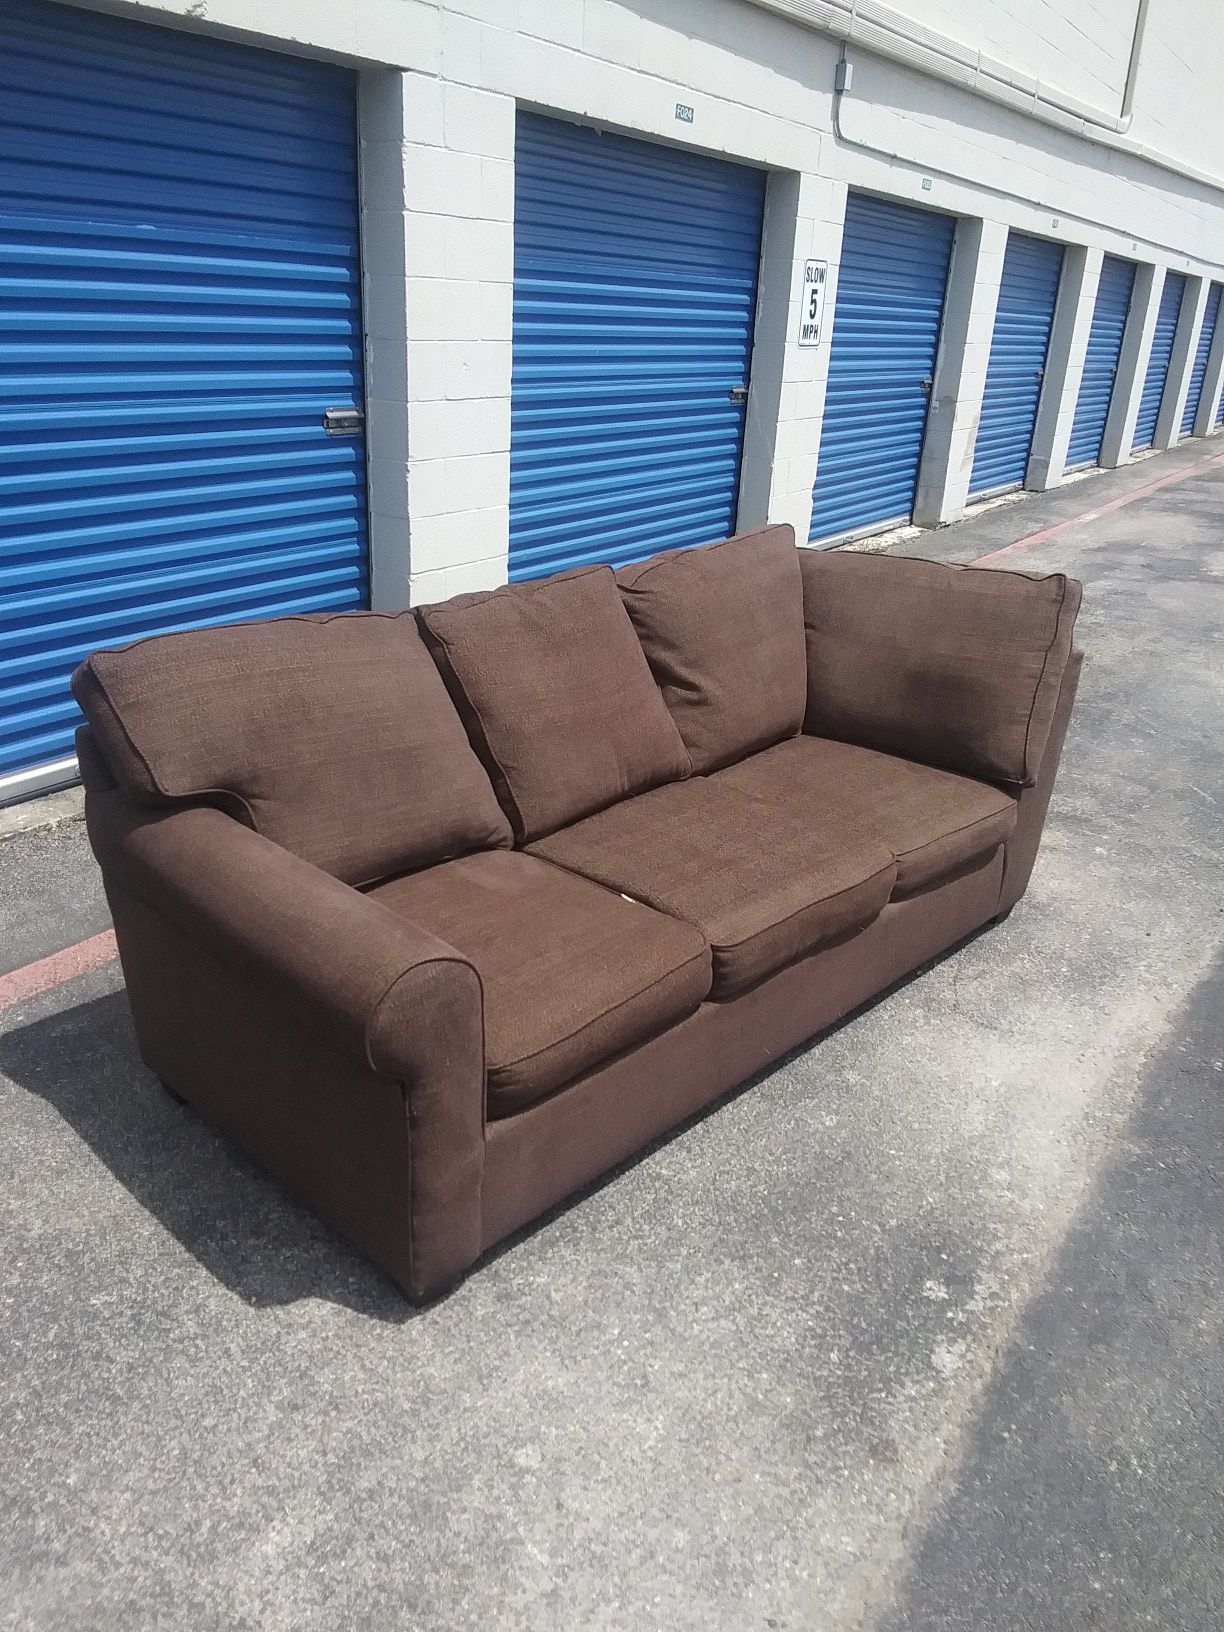 Free Delivery - brown sofa couch